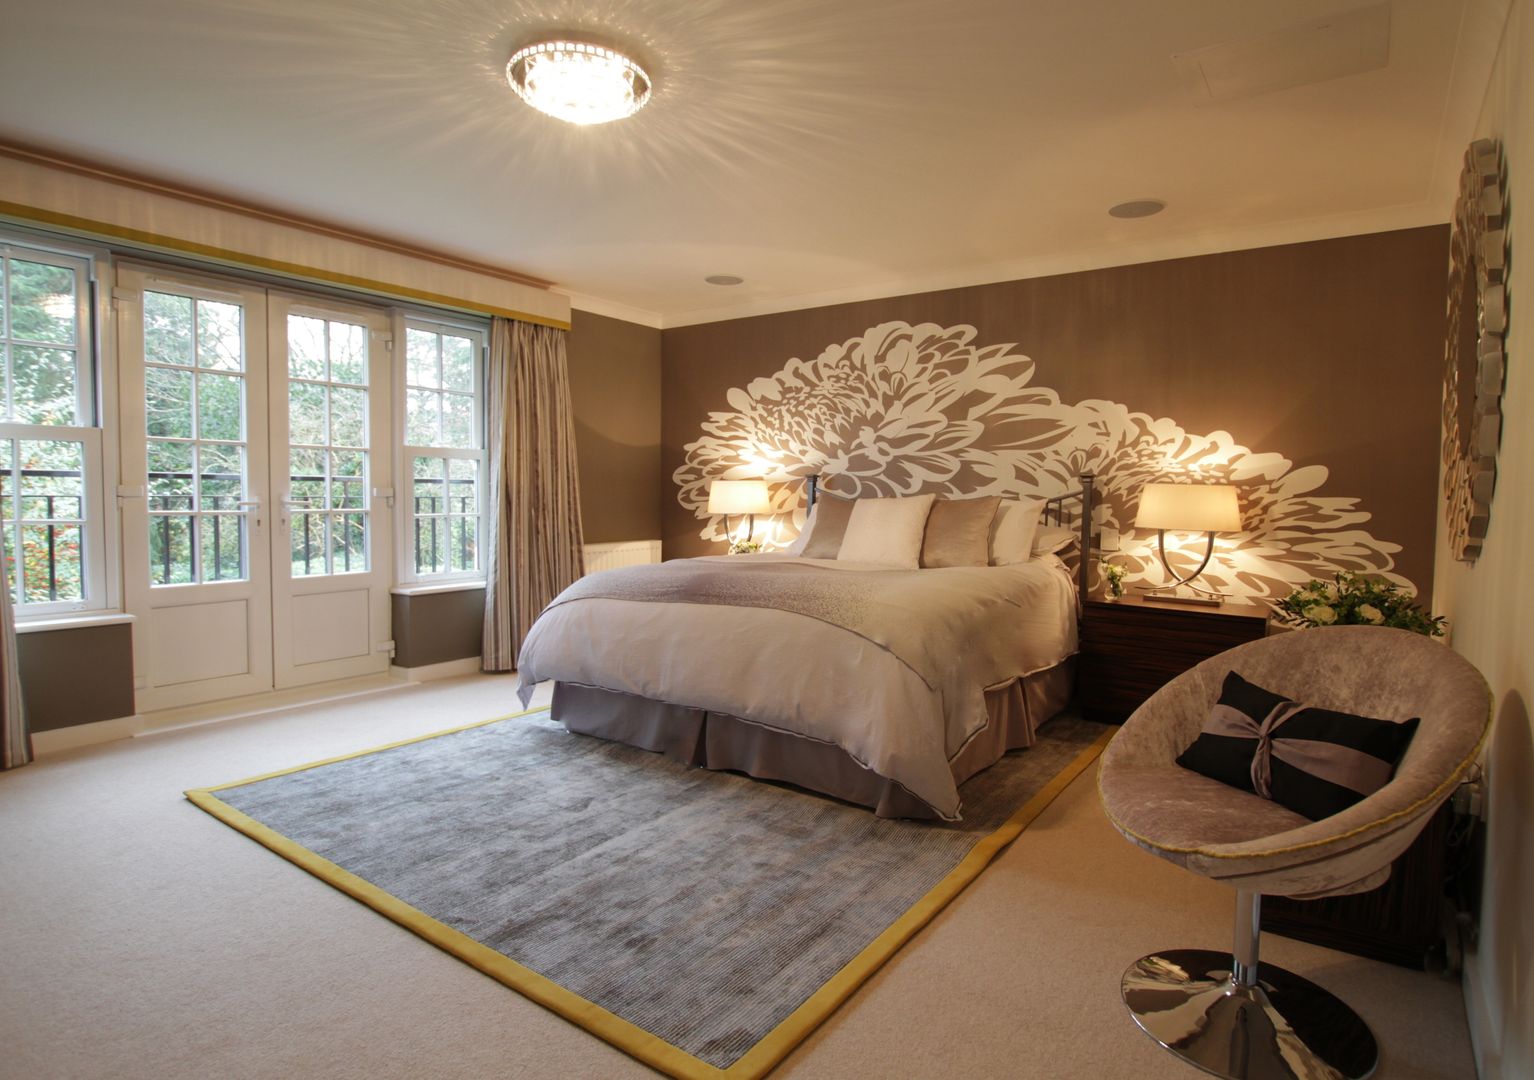 A Stunning Master Bedroom with White Floral Wall Mural & Lime Edge Rug Design by Deborah Ltd Chambre moderne